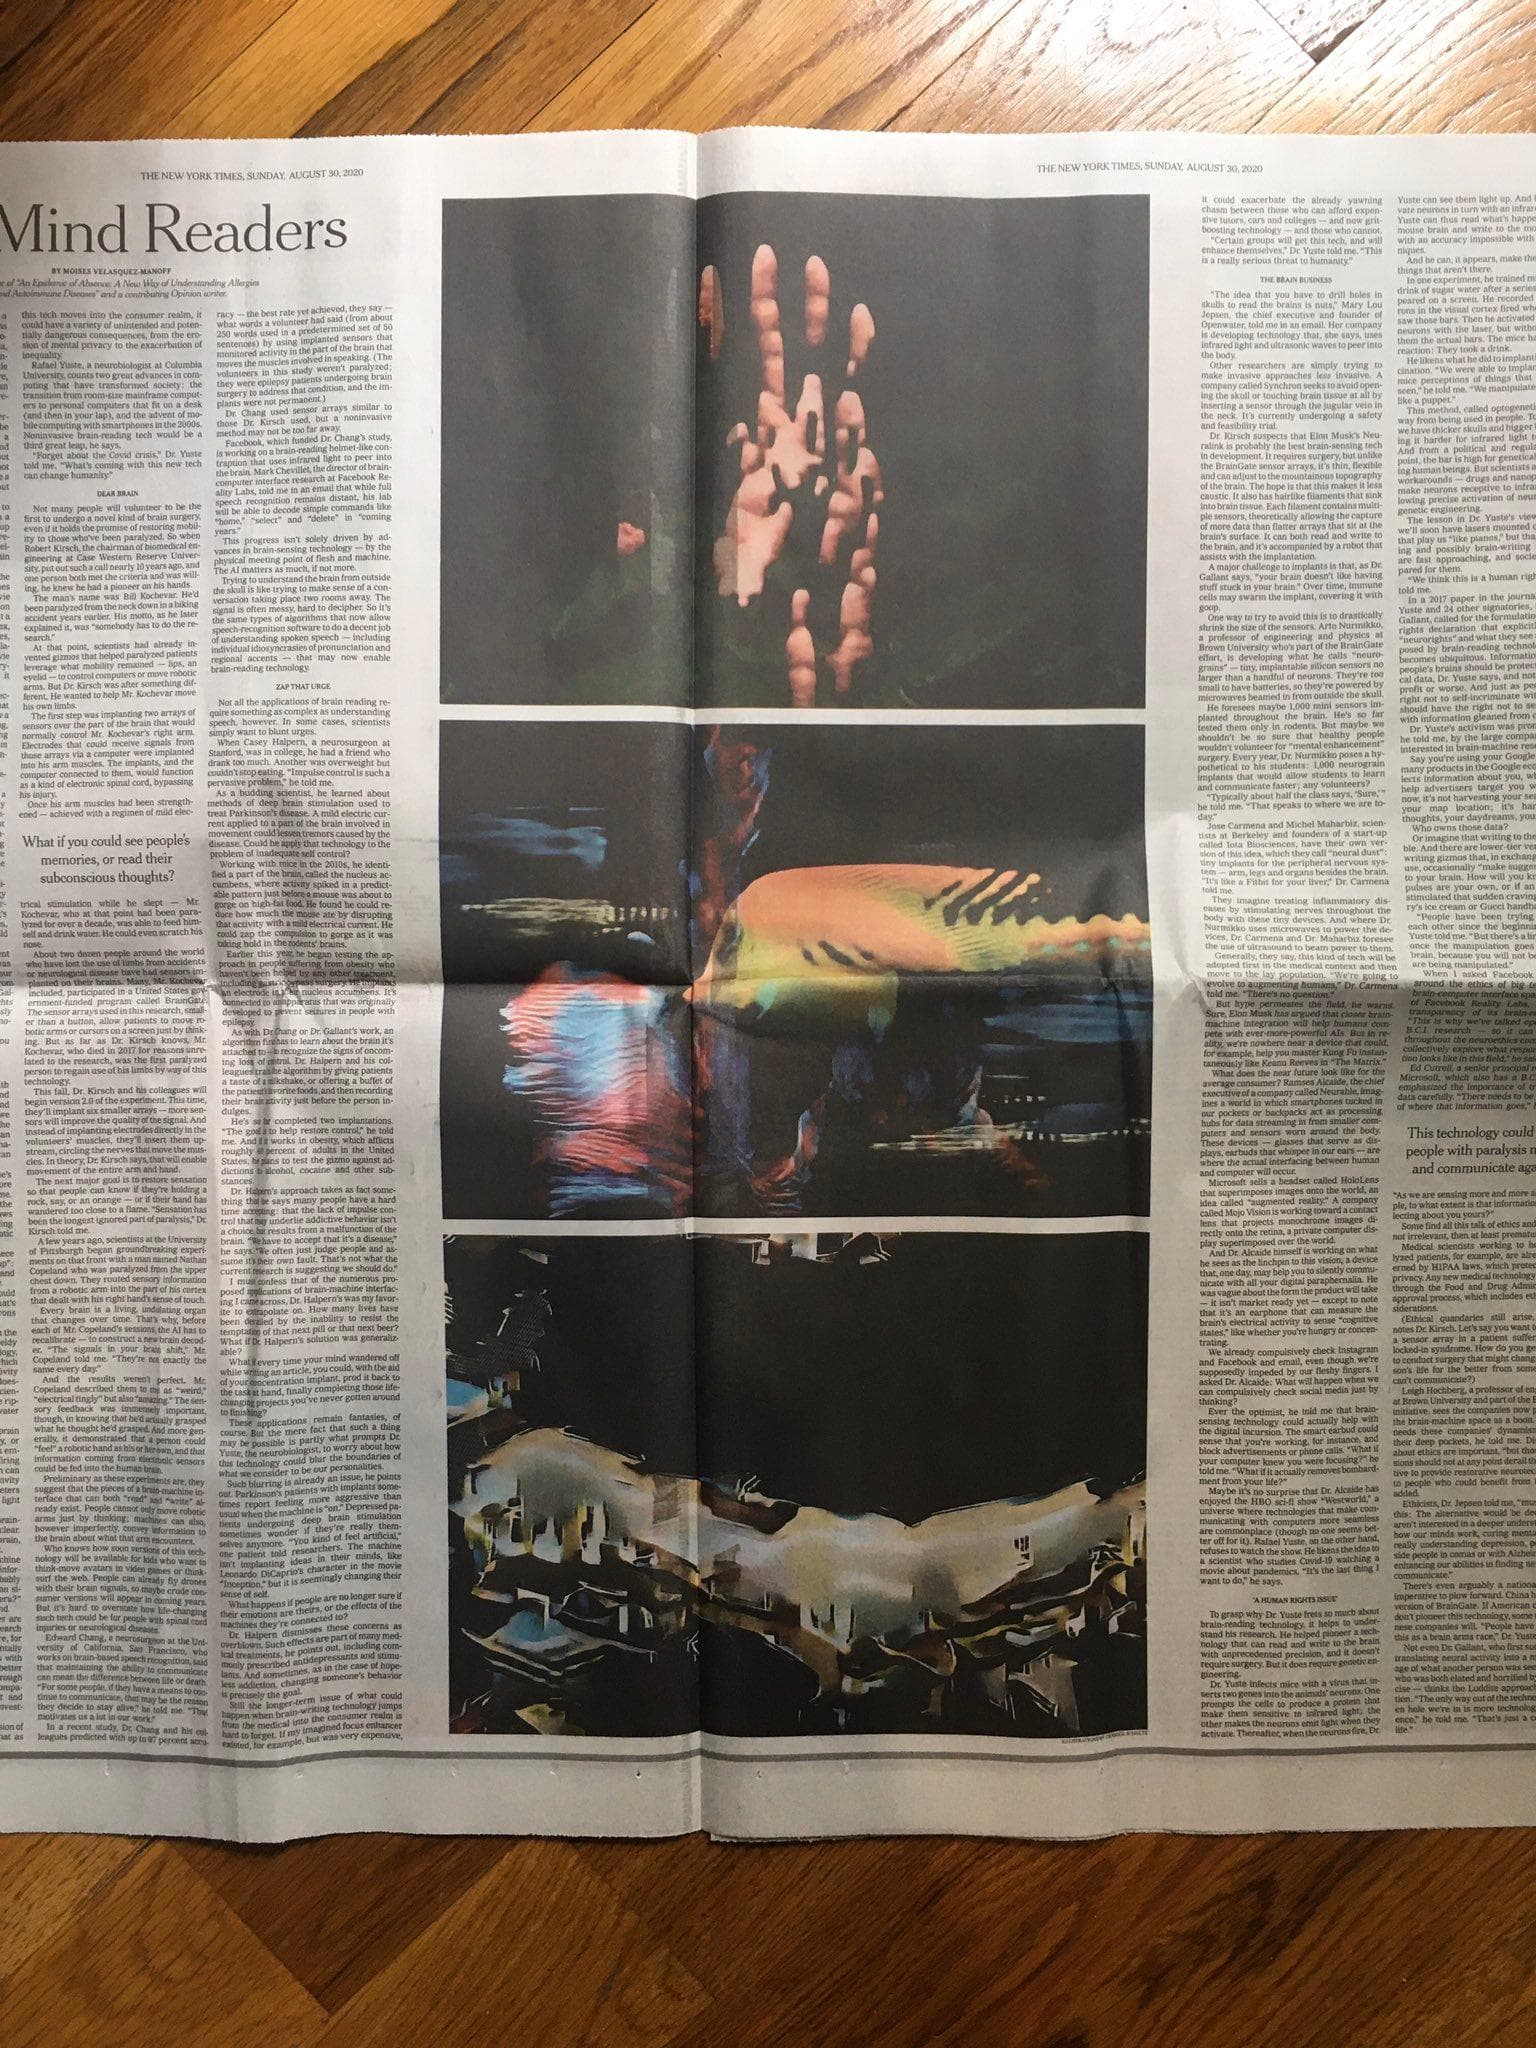 Open newspaper with three photo illustrations: a distorted hand, abstracted fish, and abstract buildings